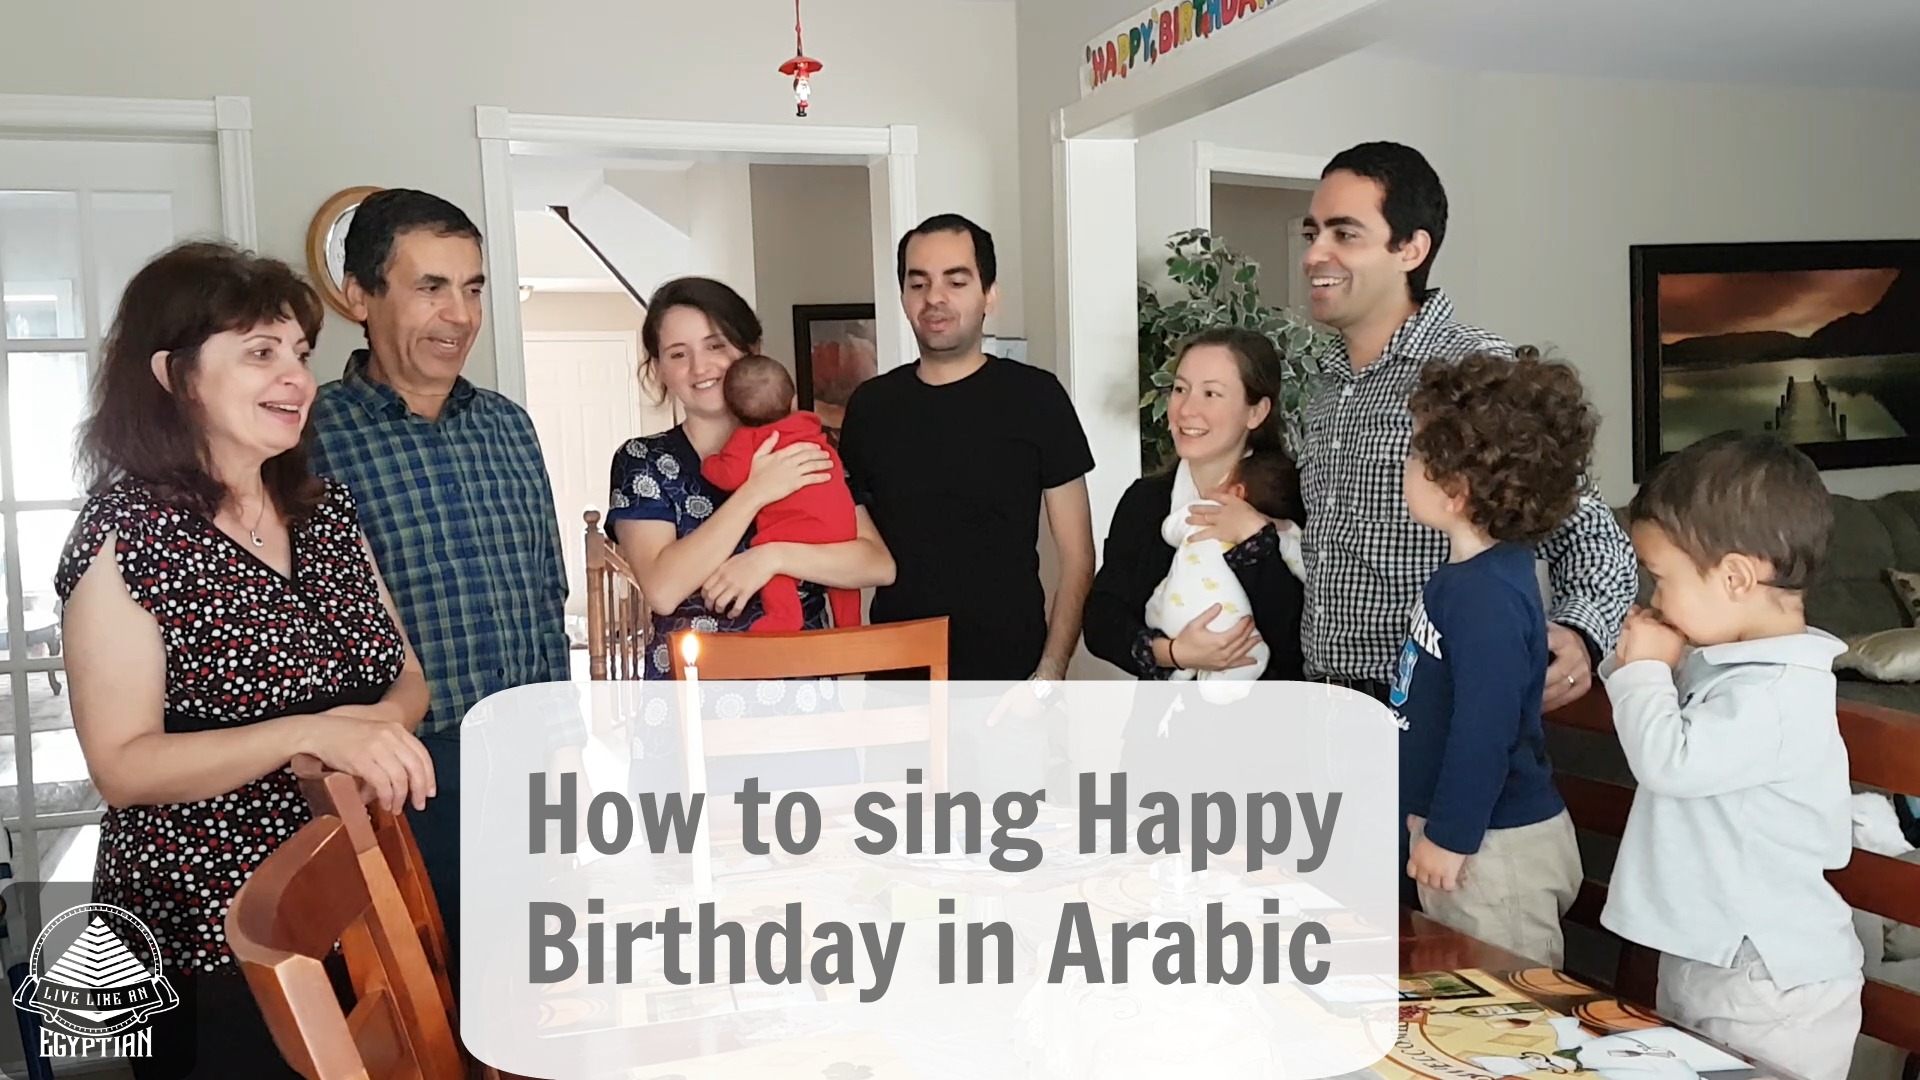 How to sing Happy Birthday in Arabic - Live Like an Egyptian